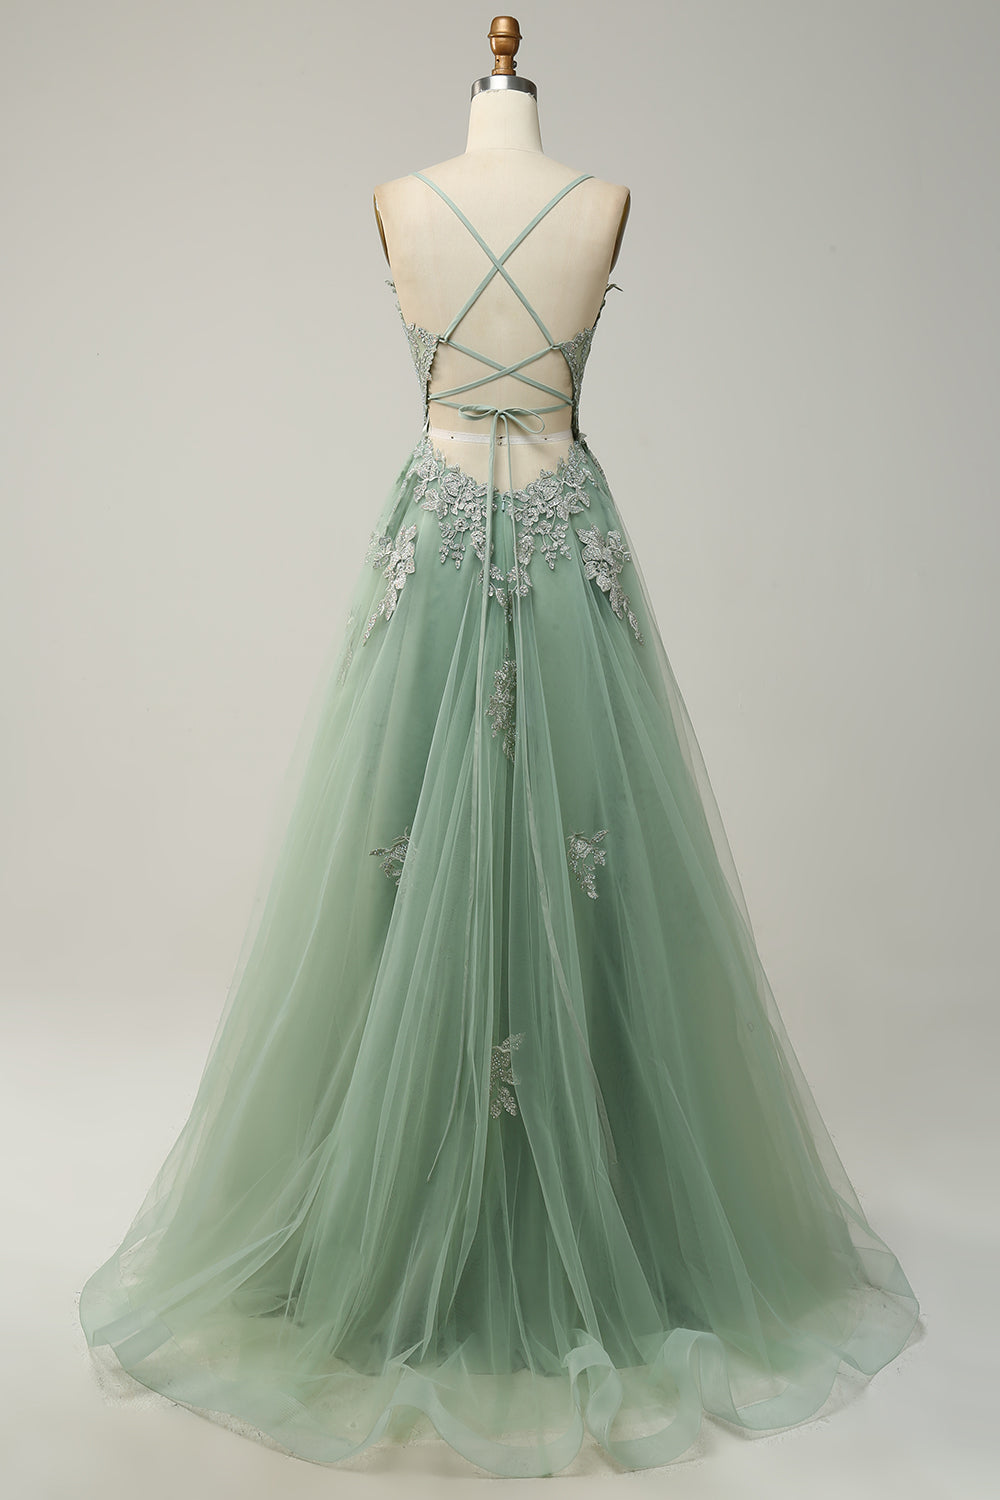 Green A Line Spaghetti Straps Long Wedding Party Dress with Criss Cross Back